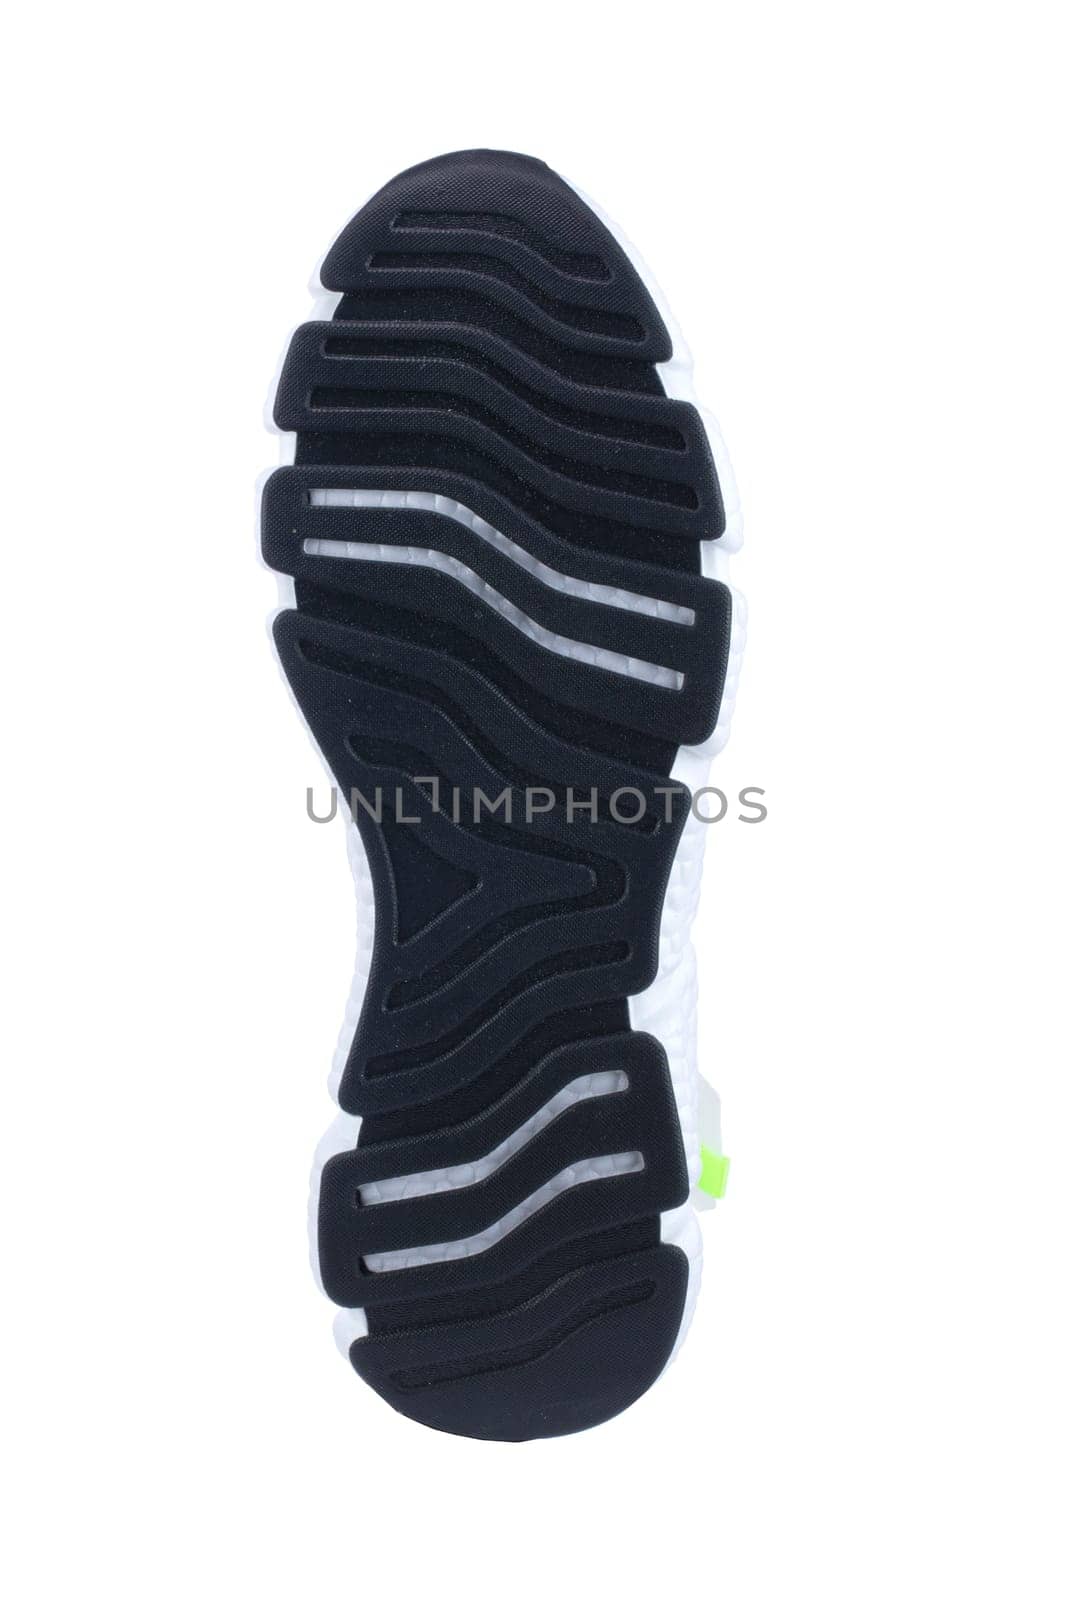 Black rubber sole of the sneaker with white inserts isolated.